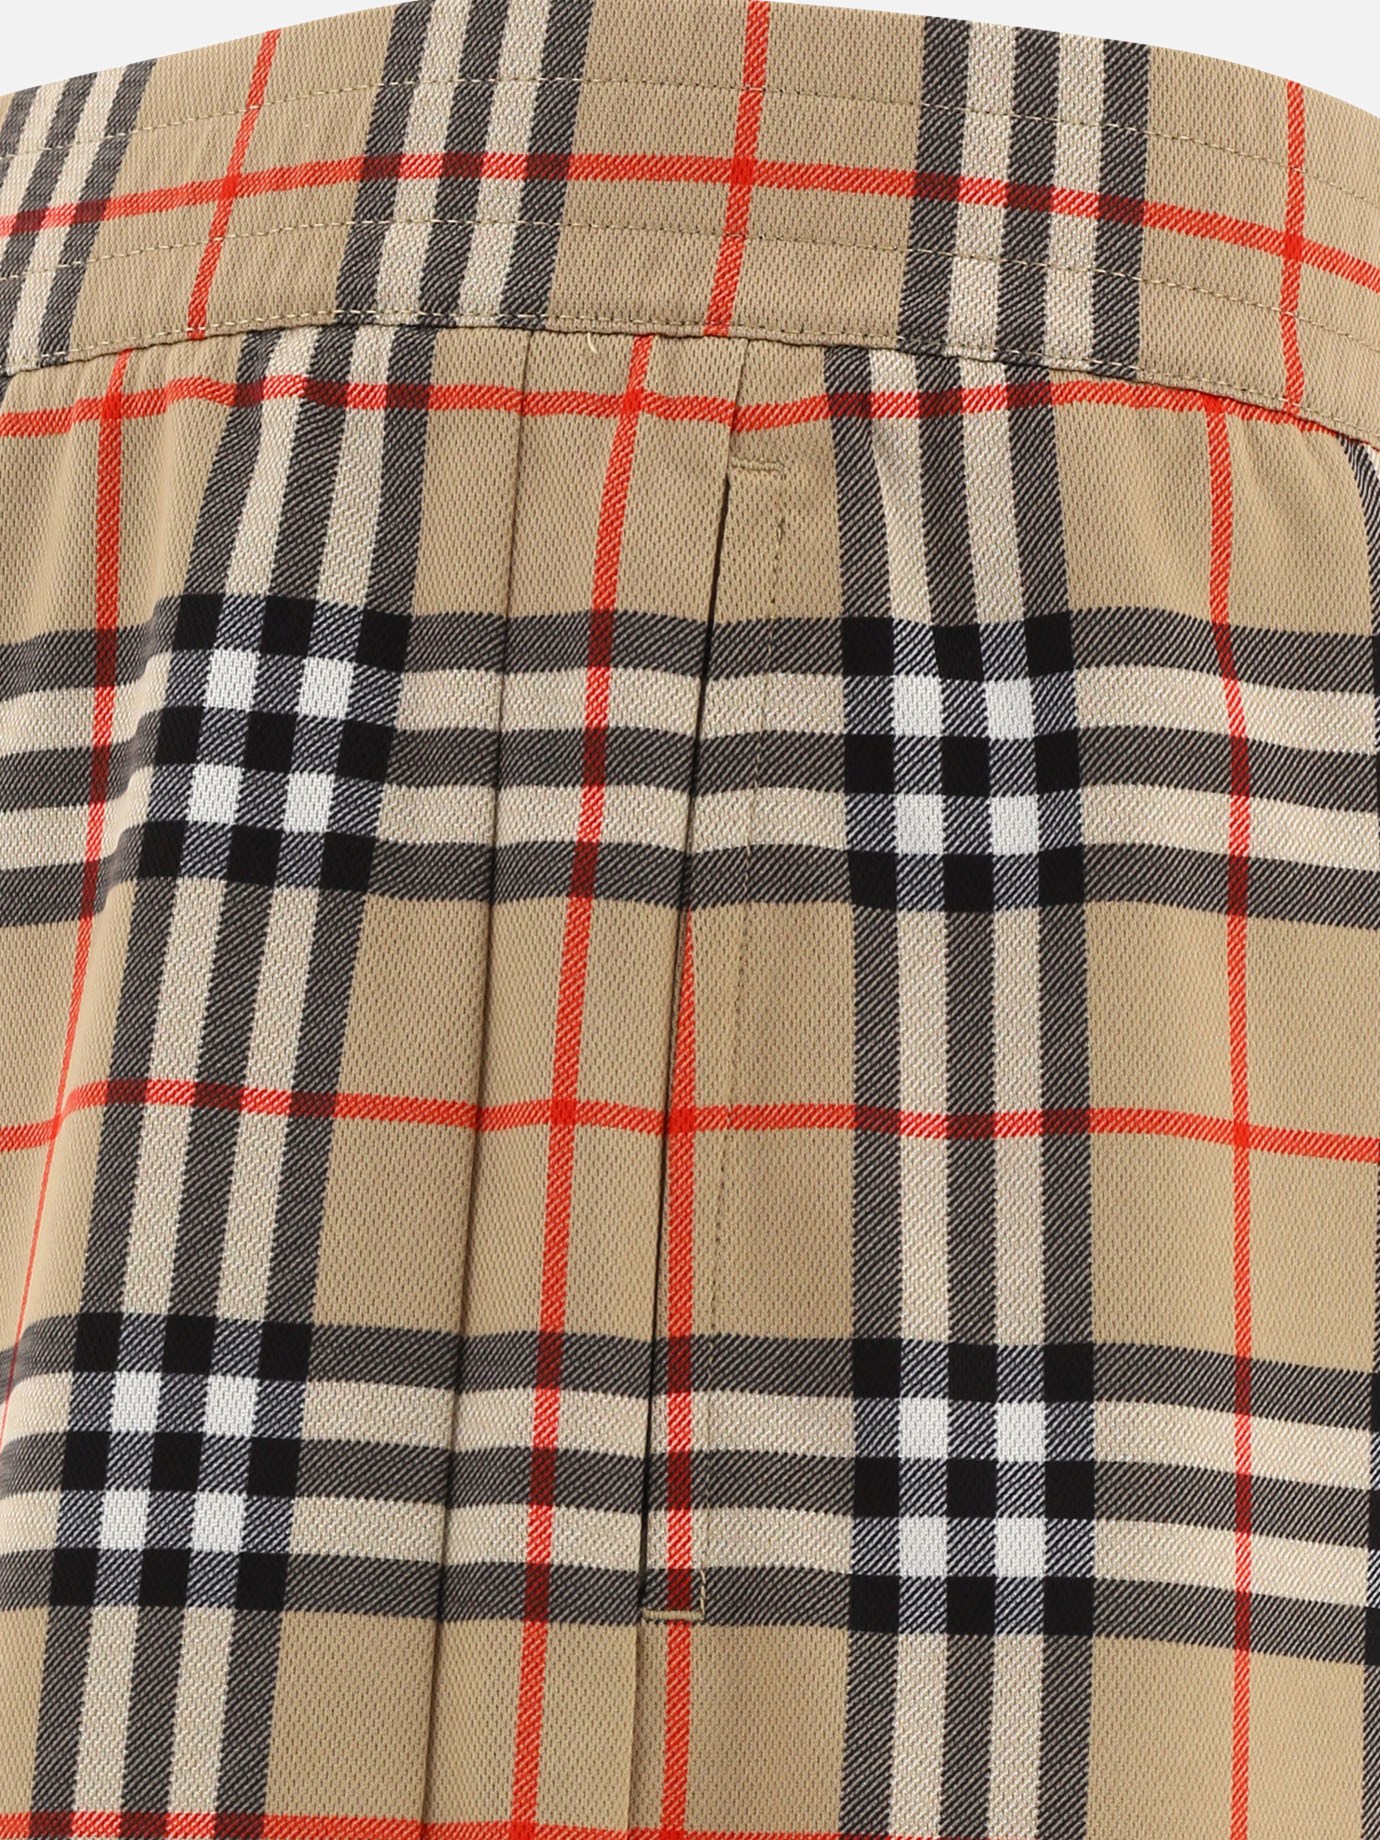  Vintage Check  shorts by Burberry